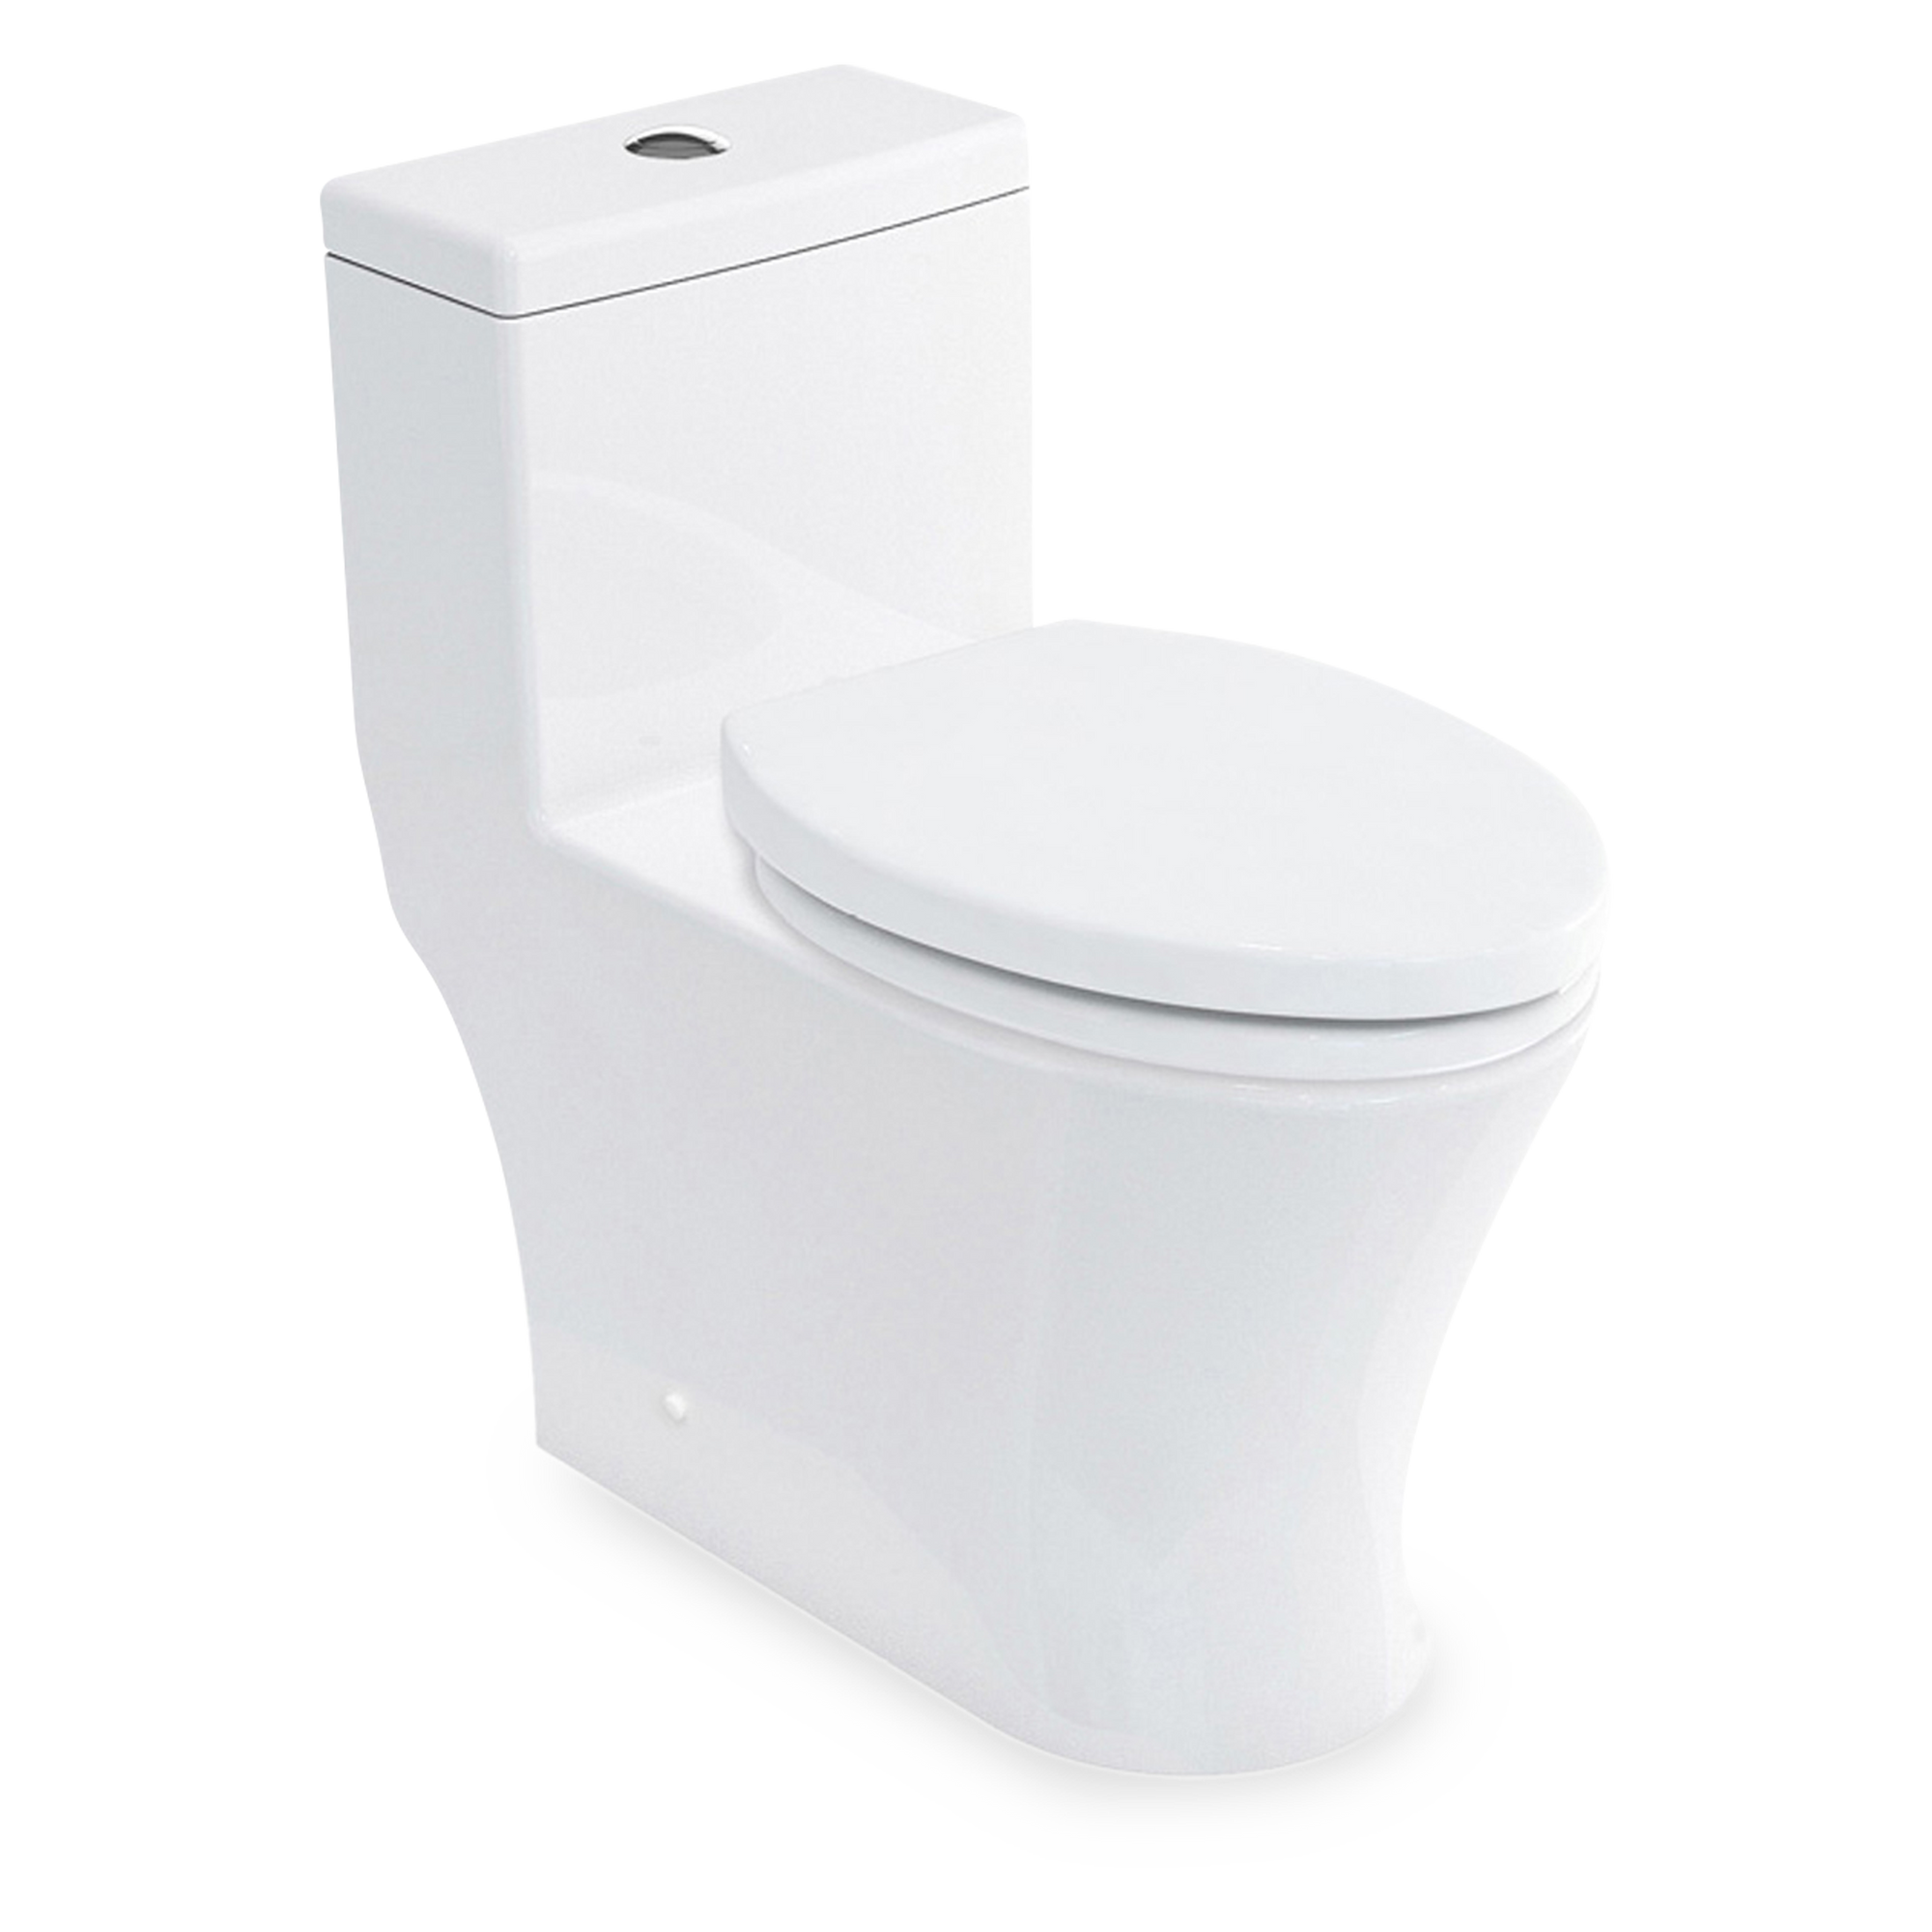 The M Pro One-Piece Toilet includes a 12